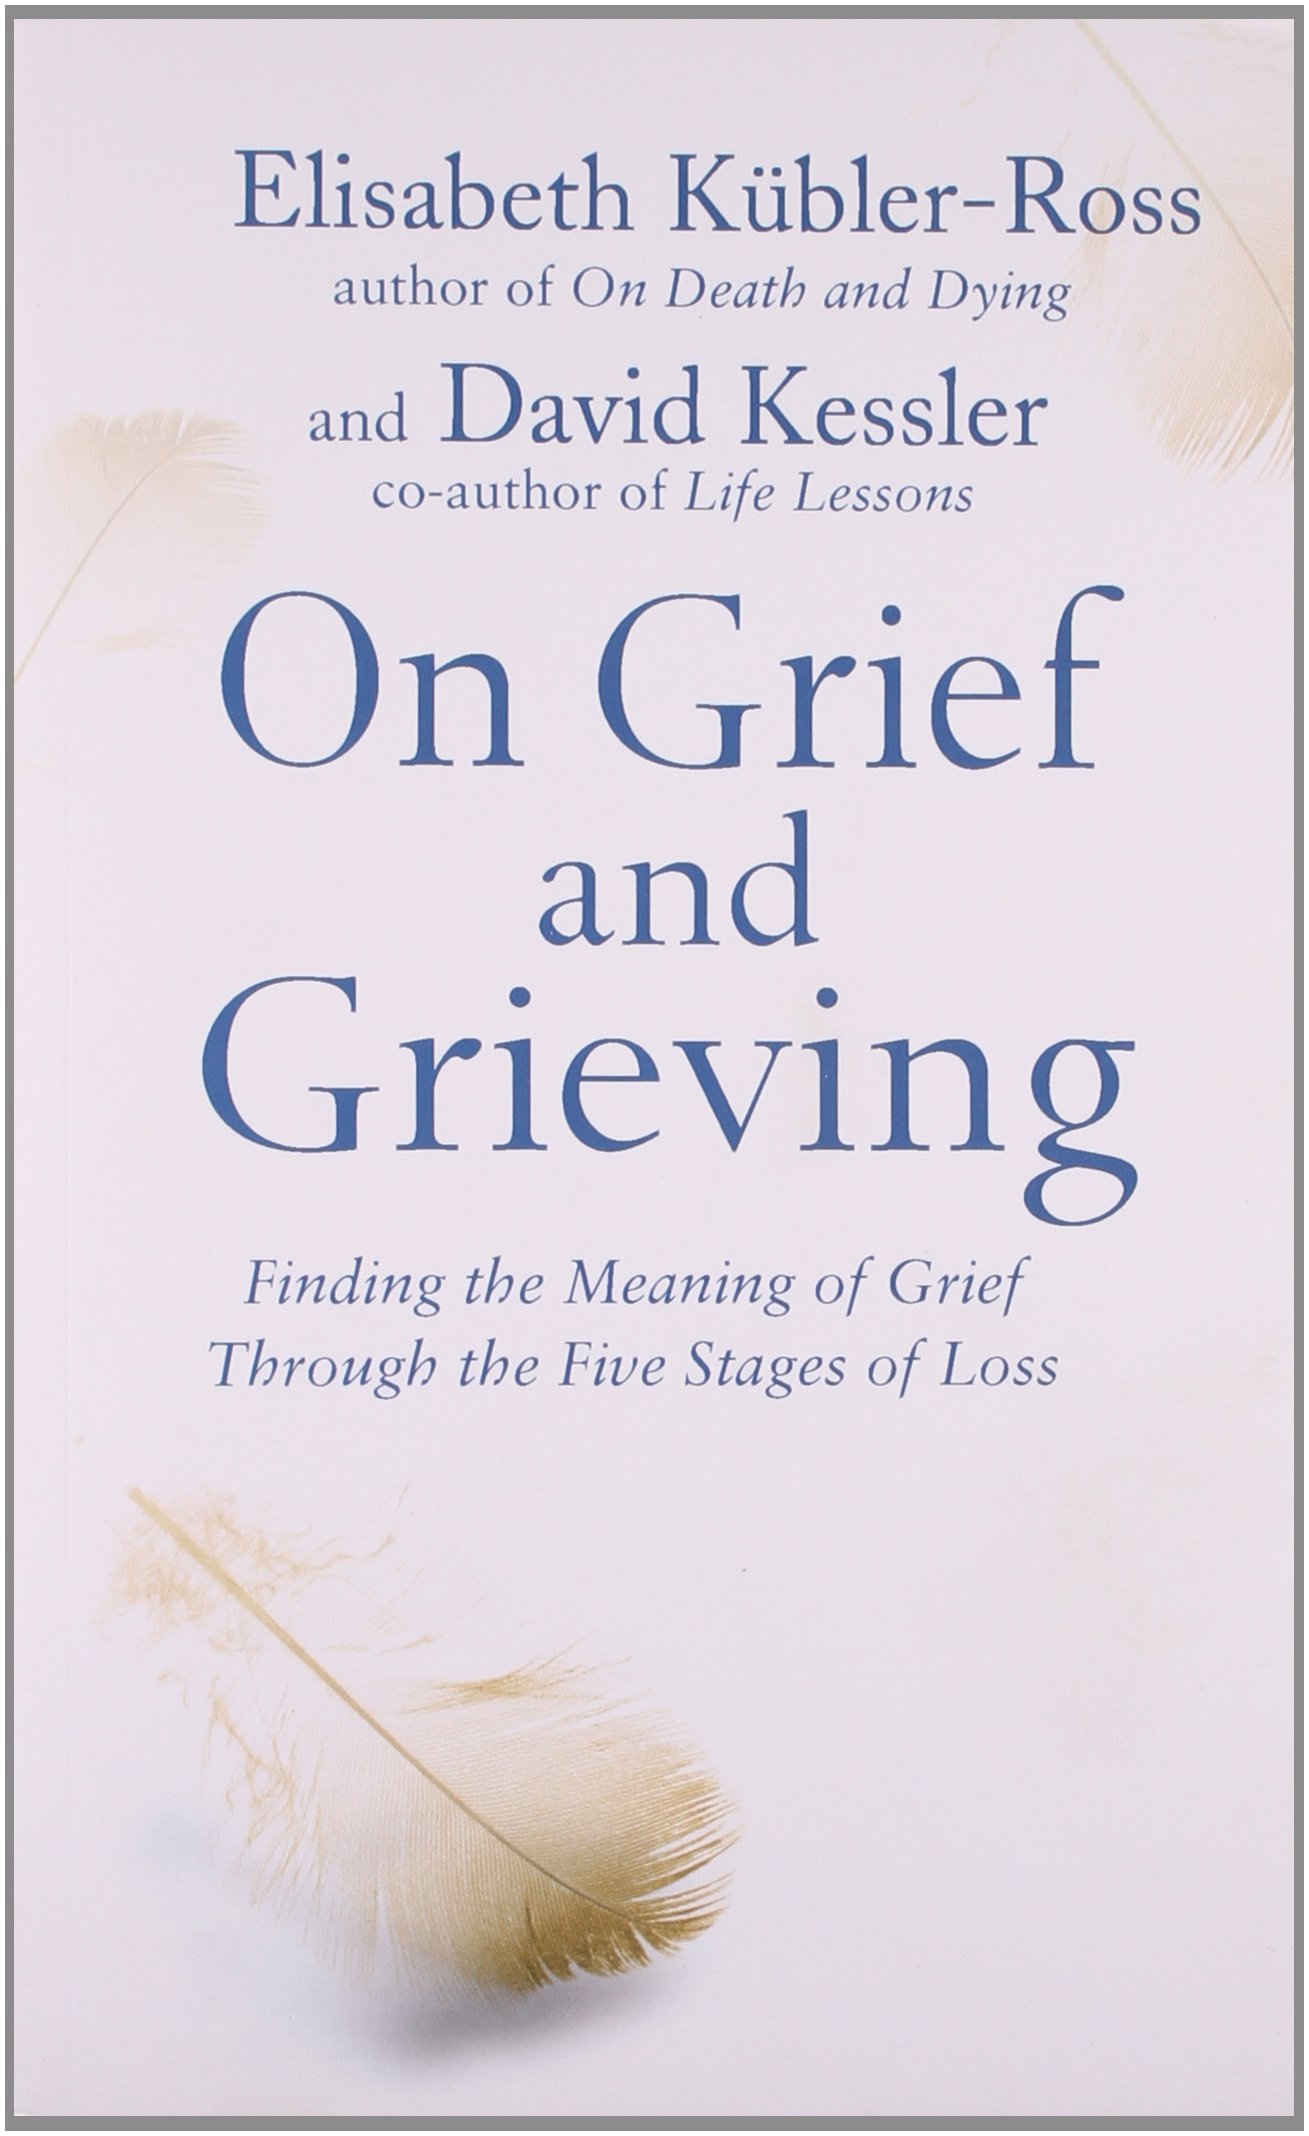 On grief and grieving